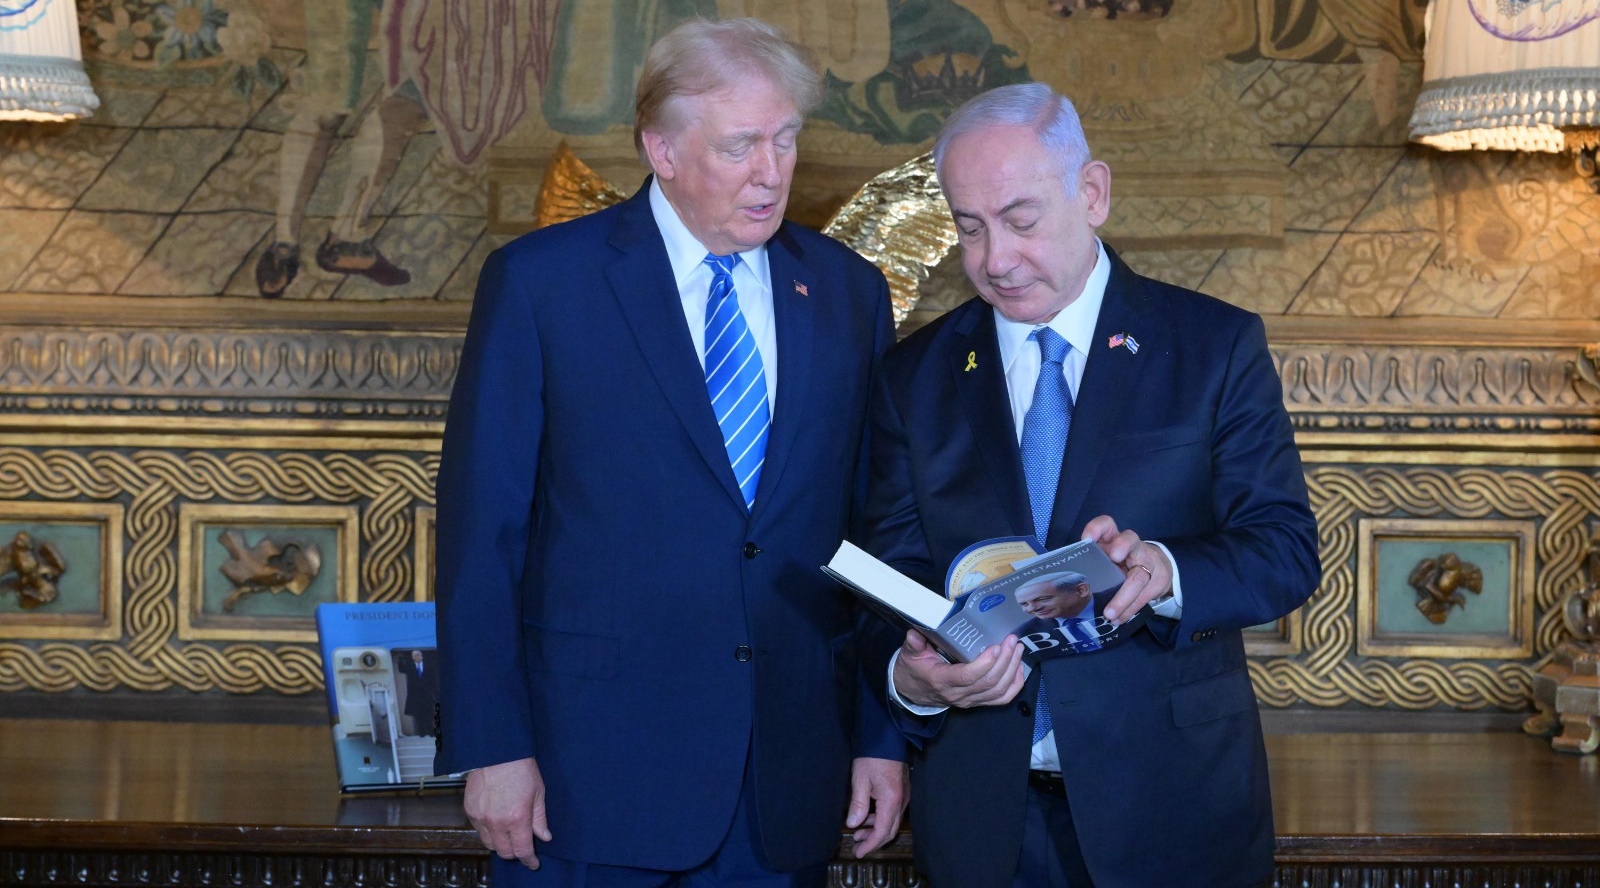 Trump, meeting with Netanyahu, says we are ‘close’ to World War III because of...